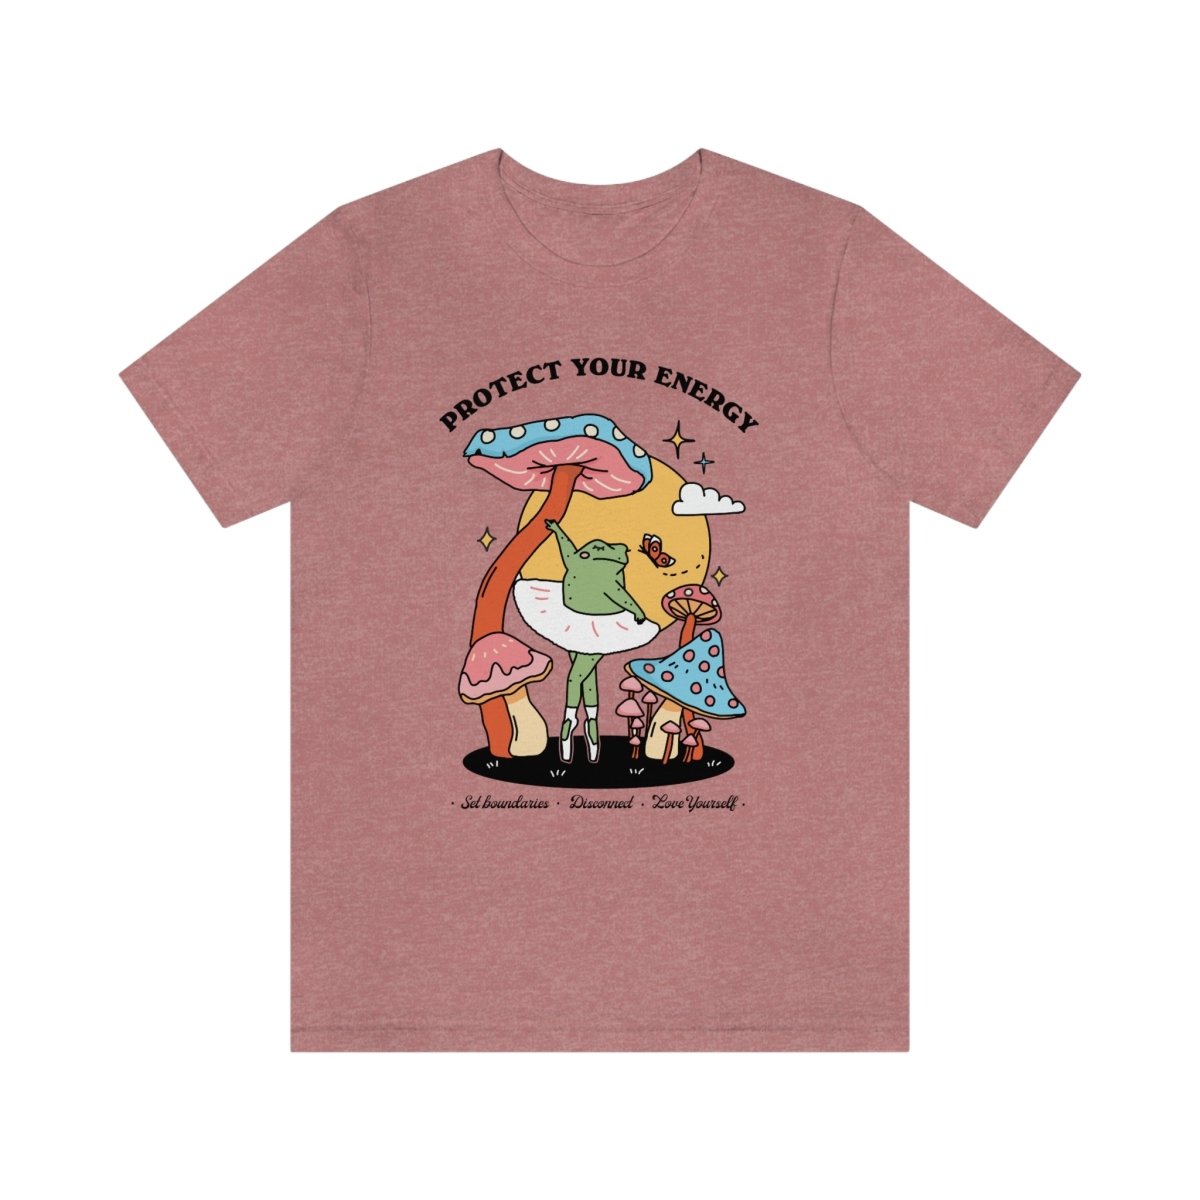 'Protect Your Energy' Frog Tshirt - T-shirts - Kinder Planet Company